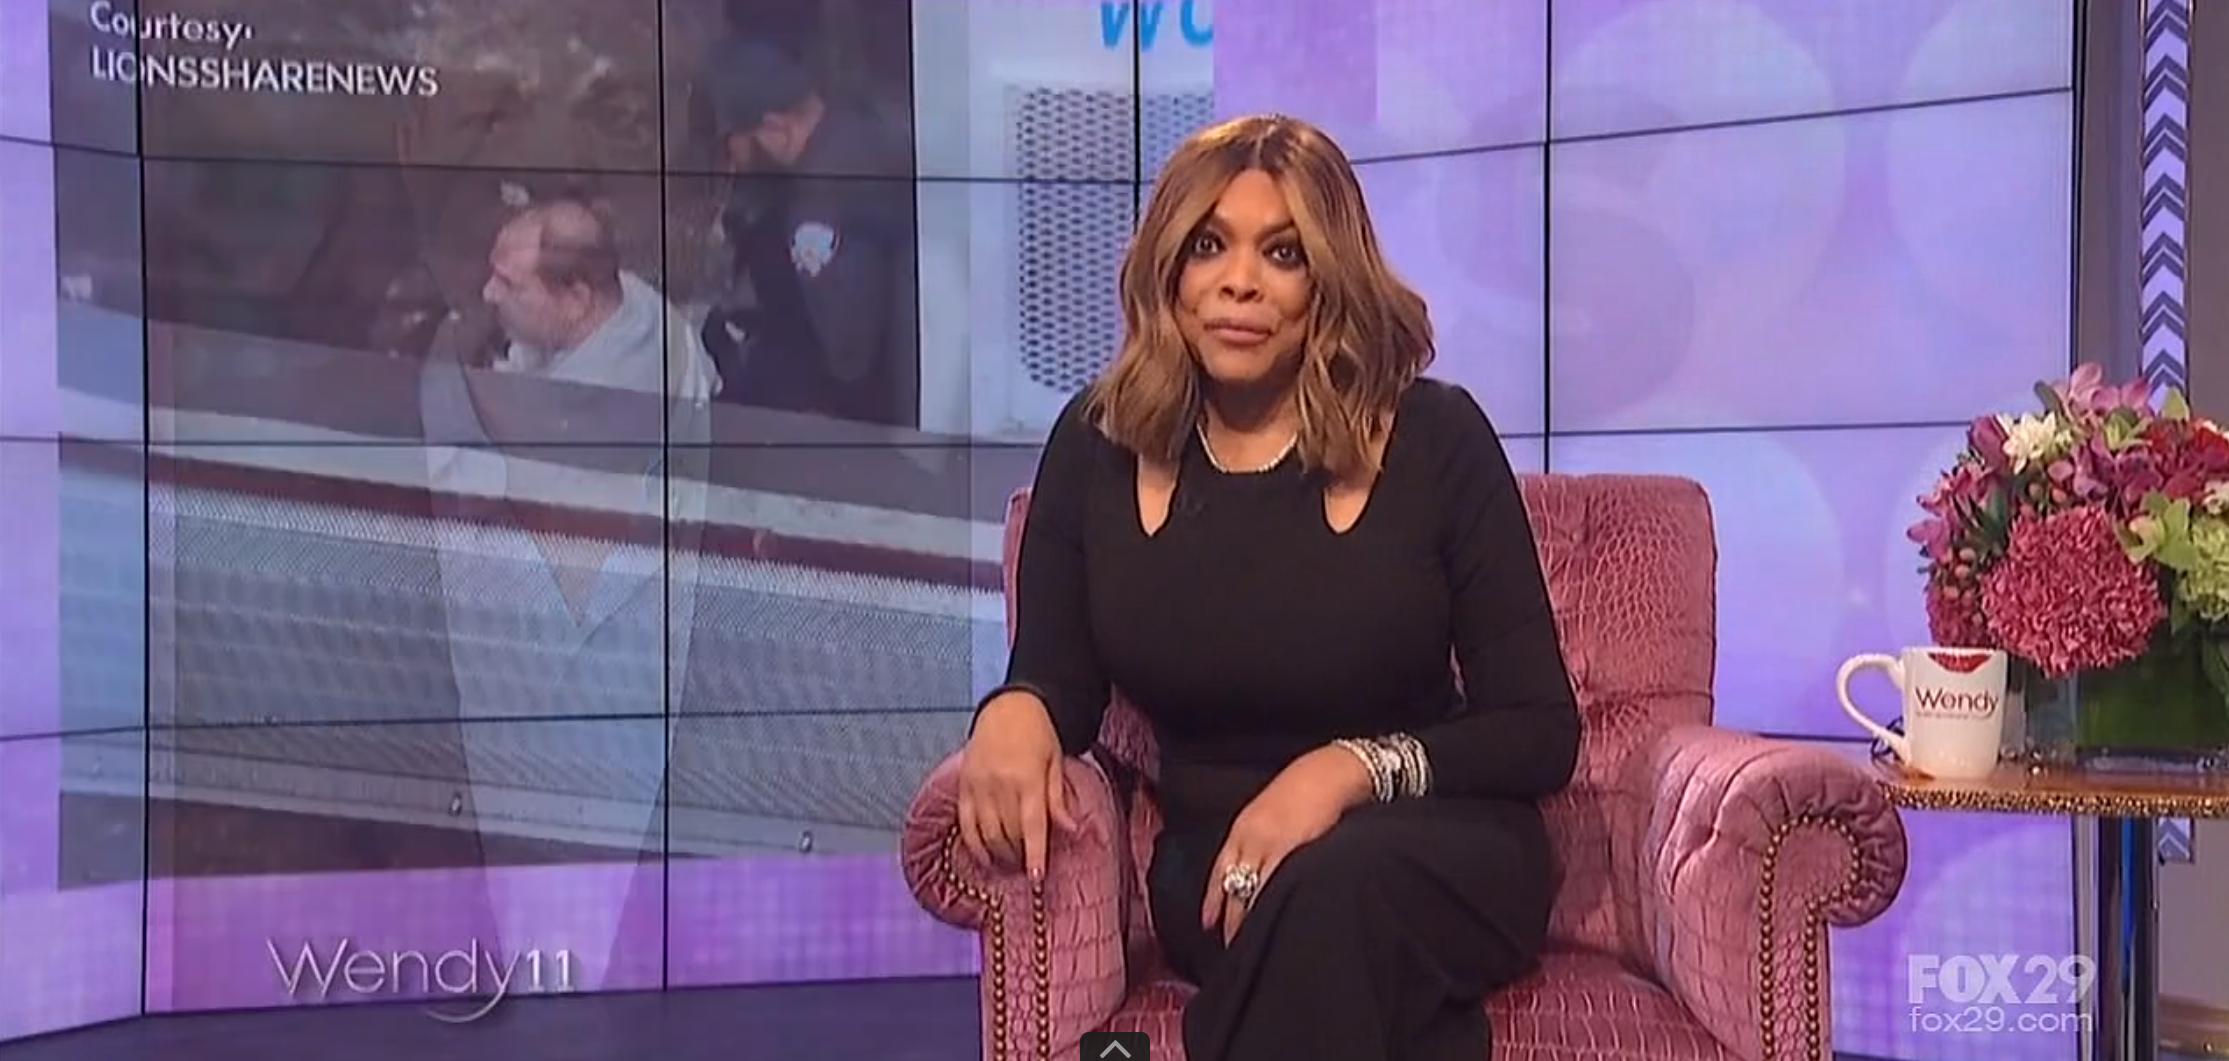  The Wendy Williams Show banned live audiences earlier this week